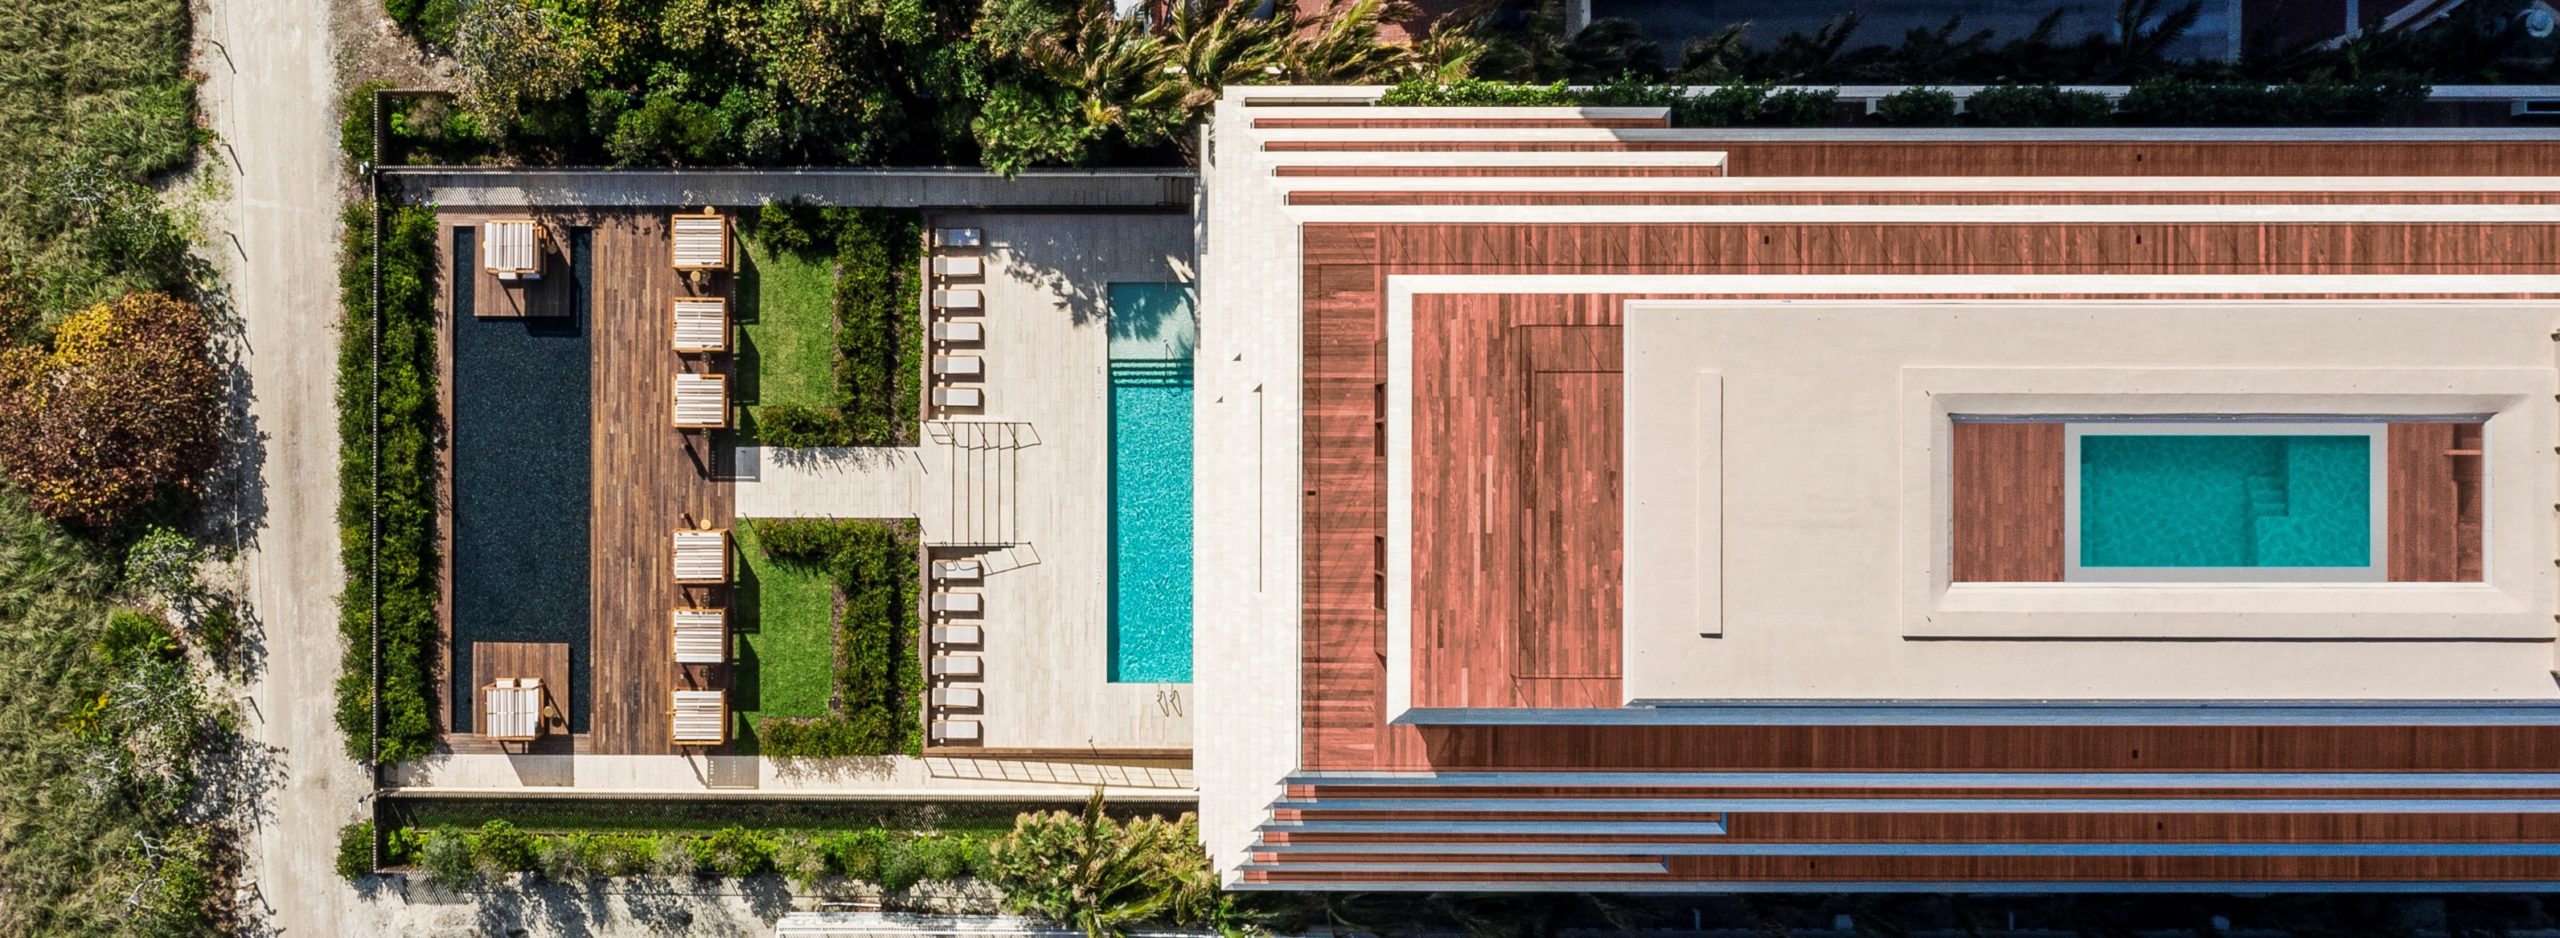 Exterior aerial view of Arte Surfside condominiums with oceanfront view. Has rooftop and front entrance pool.